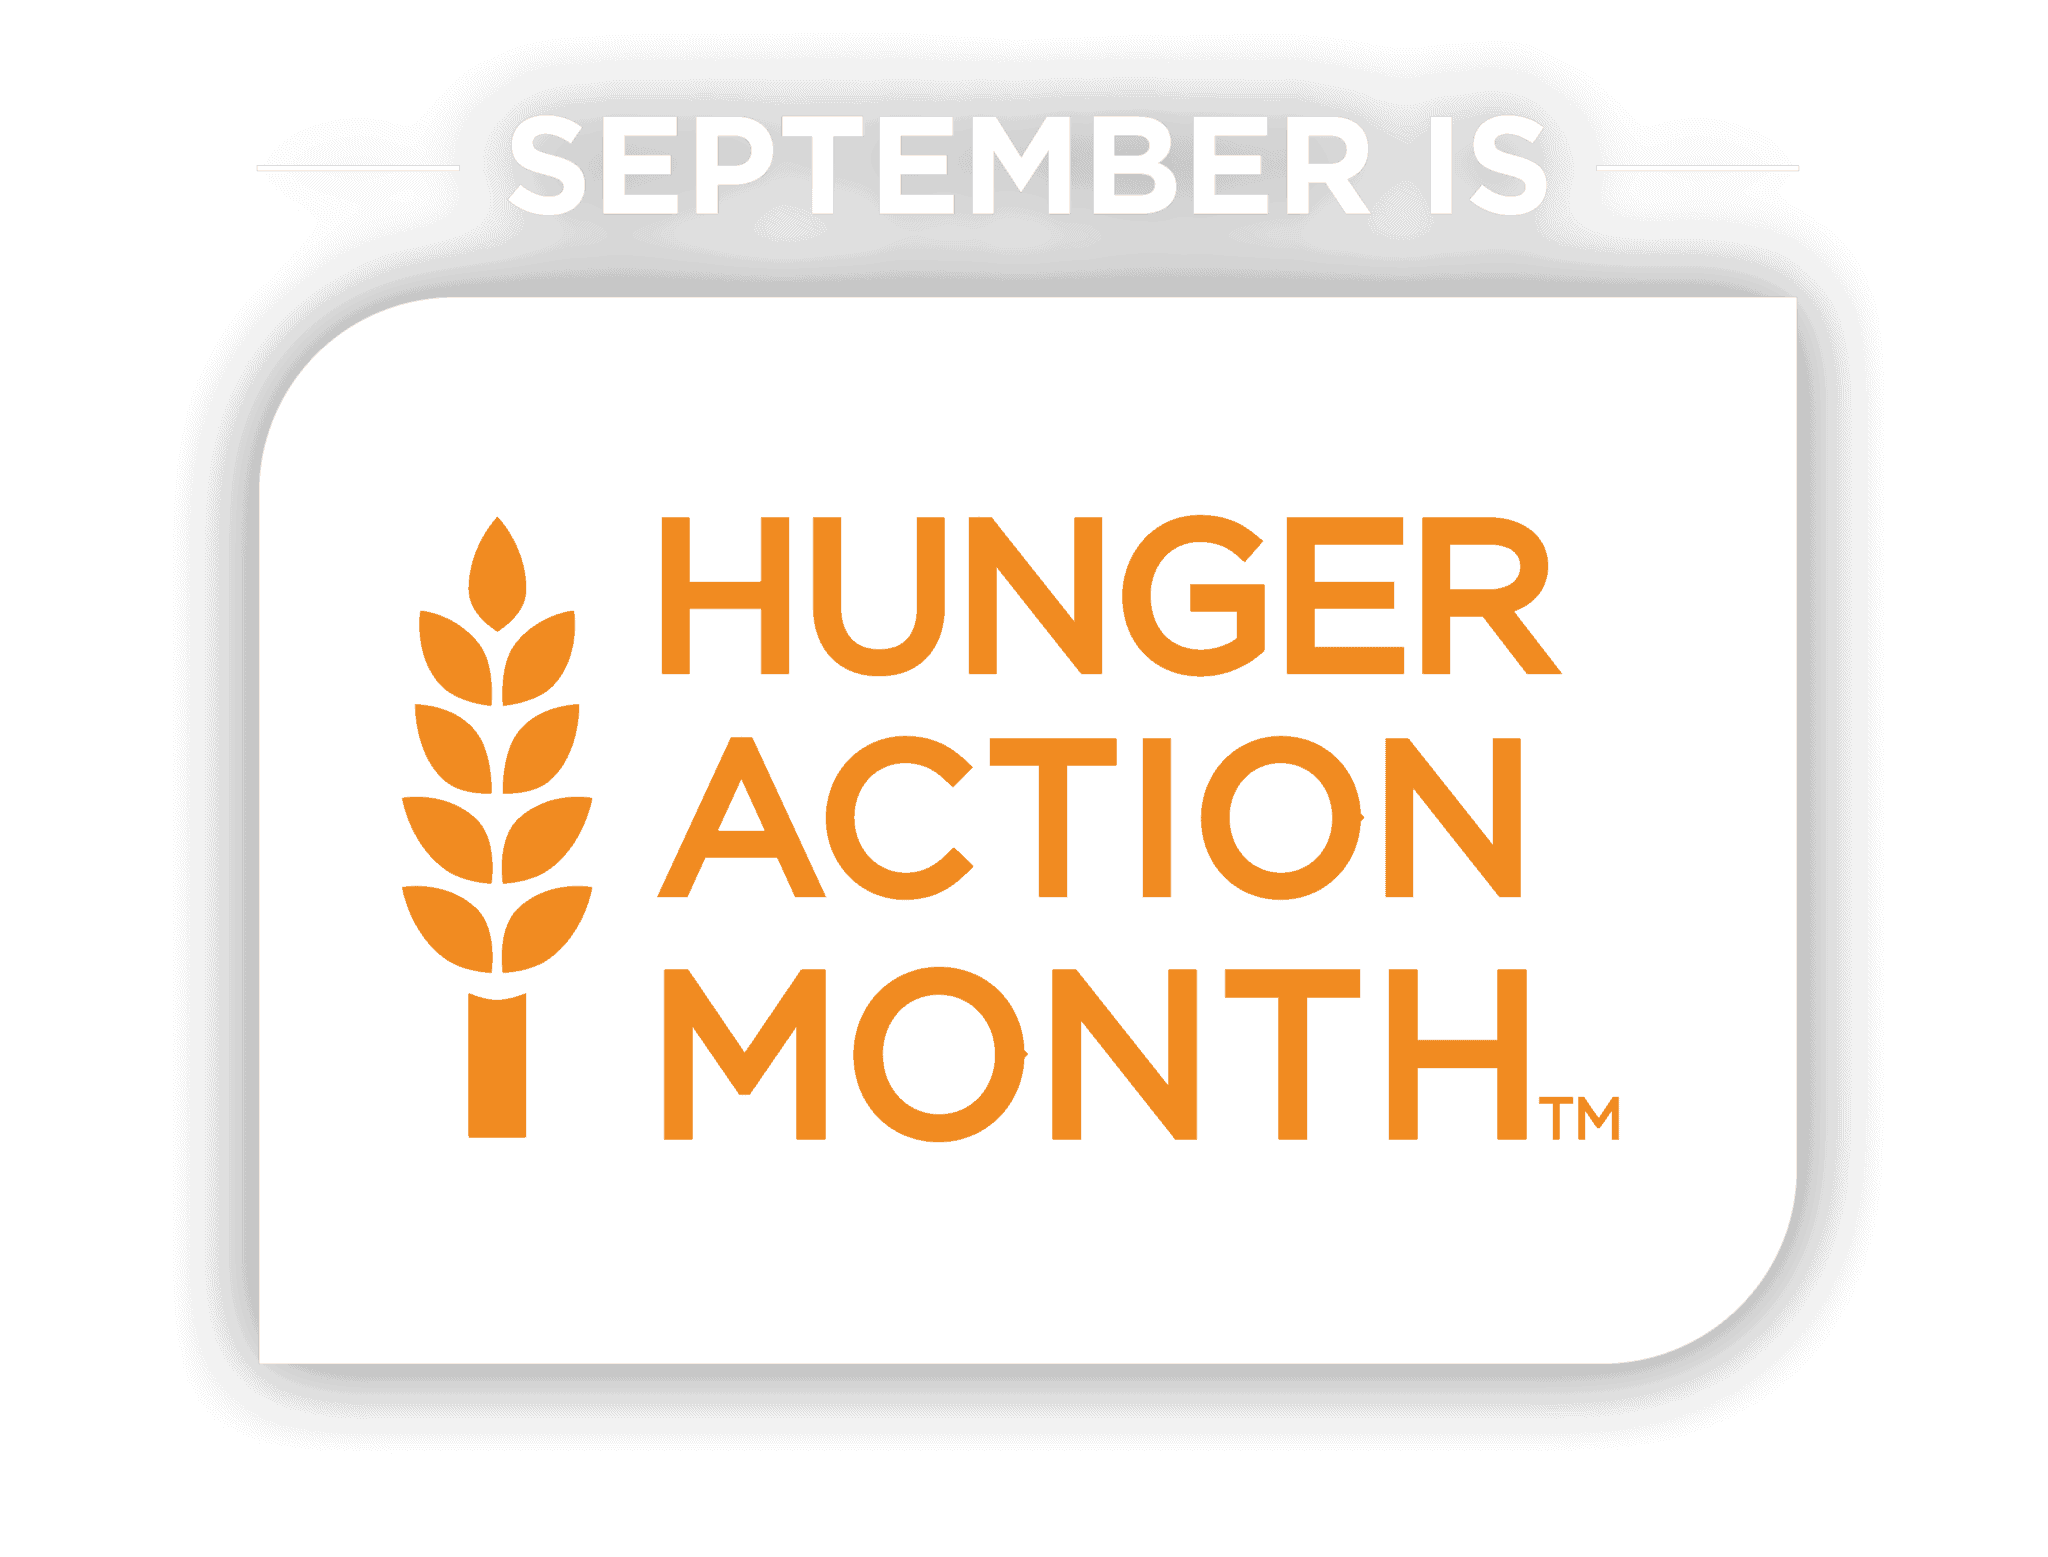 September is Hunger Action Month.